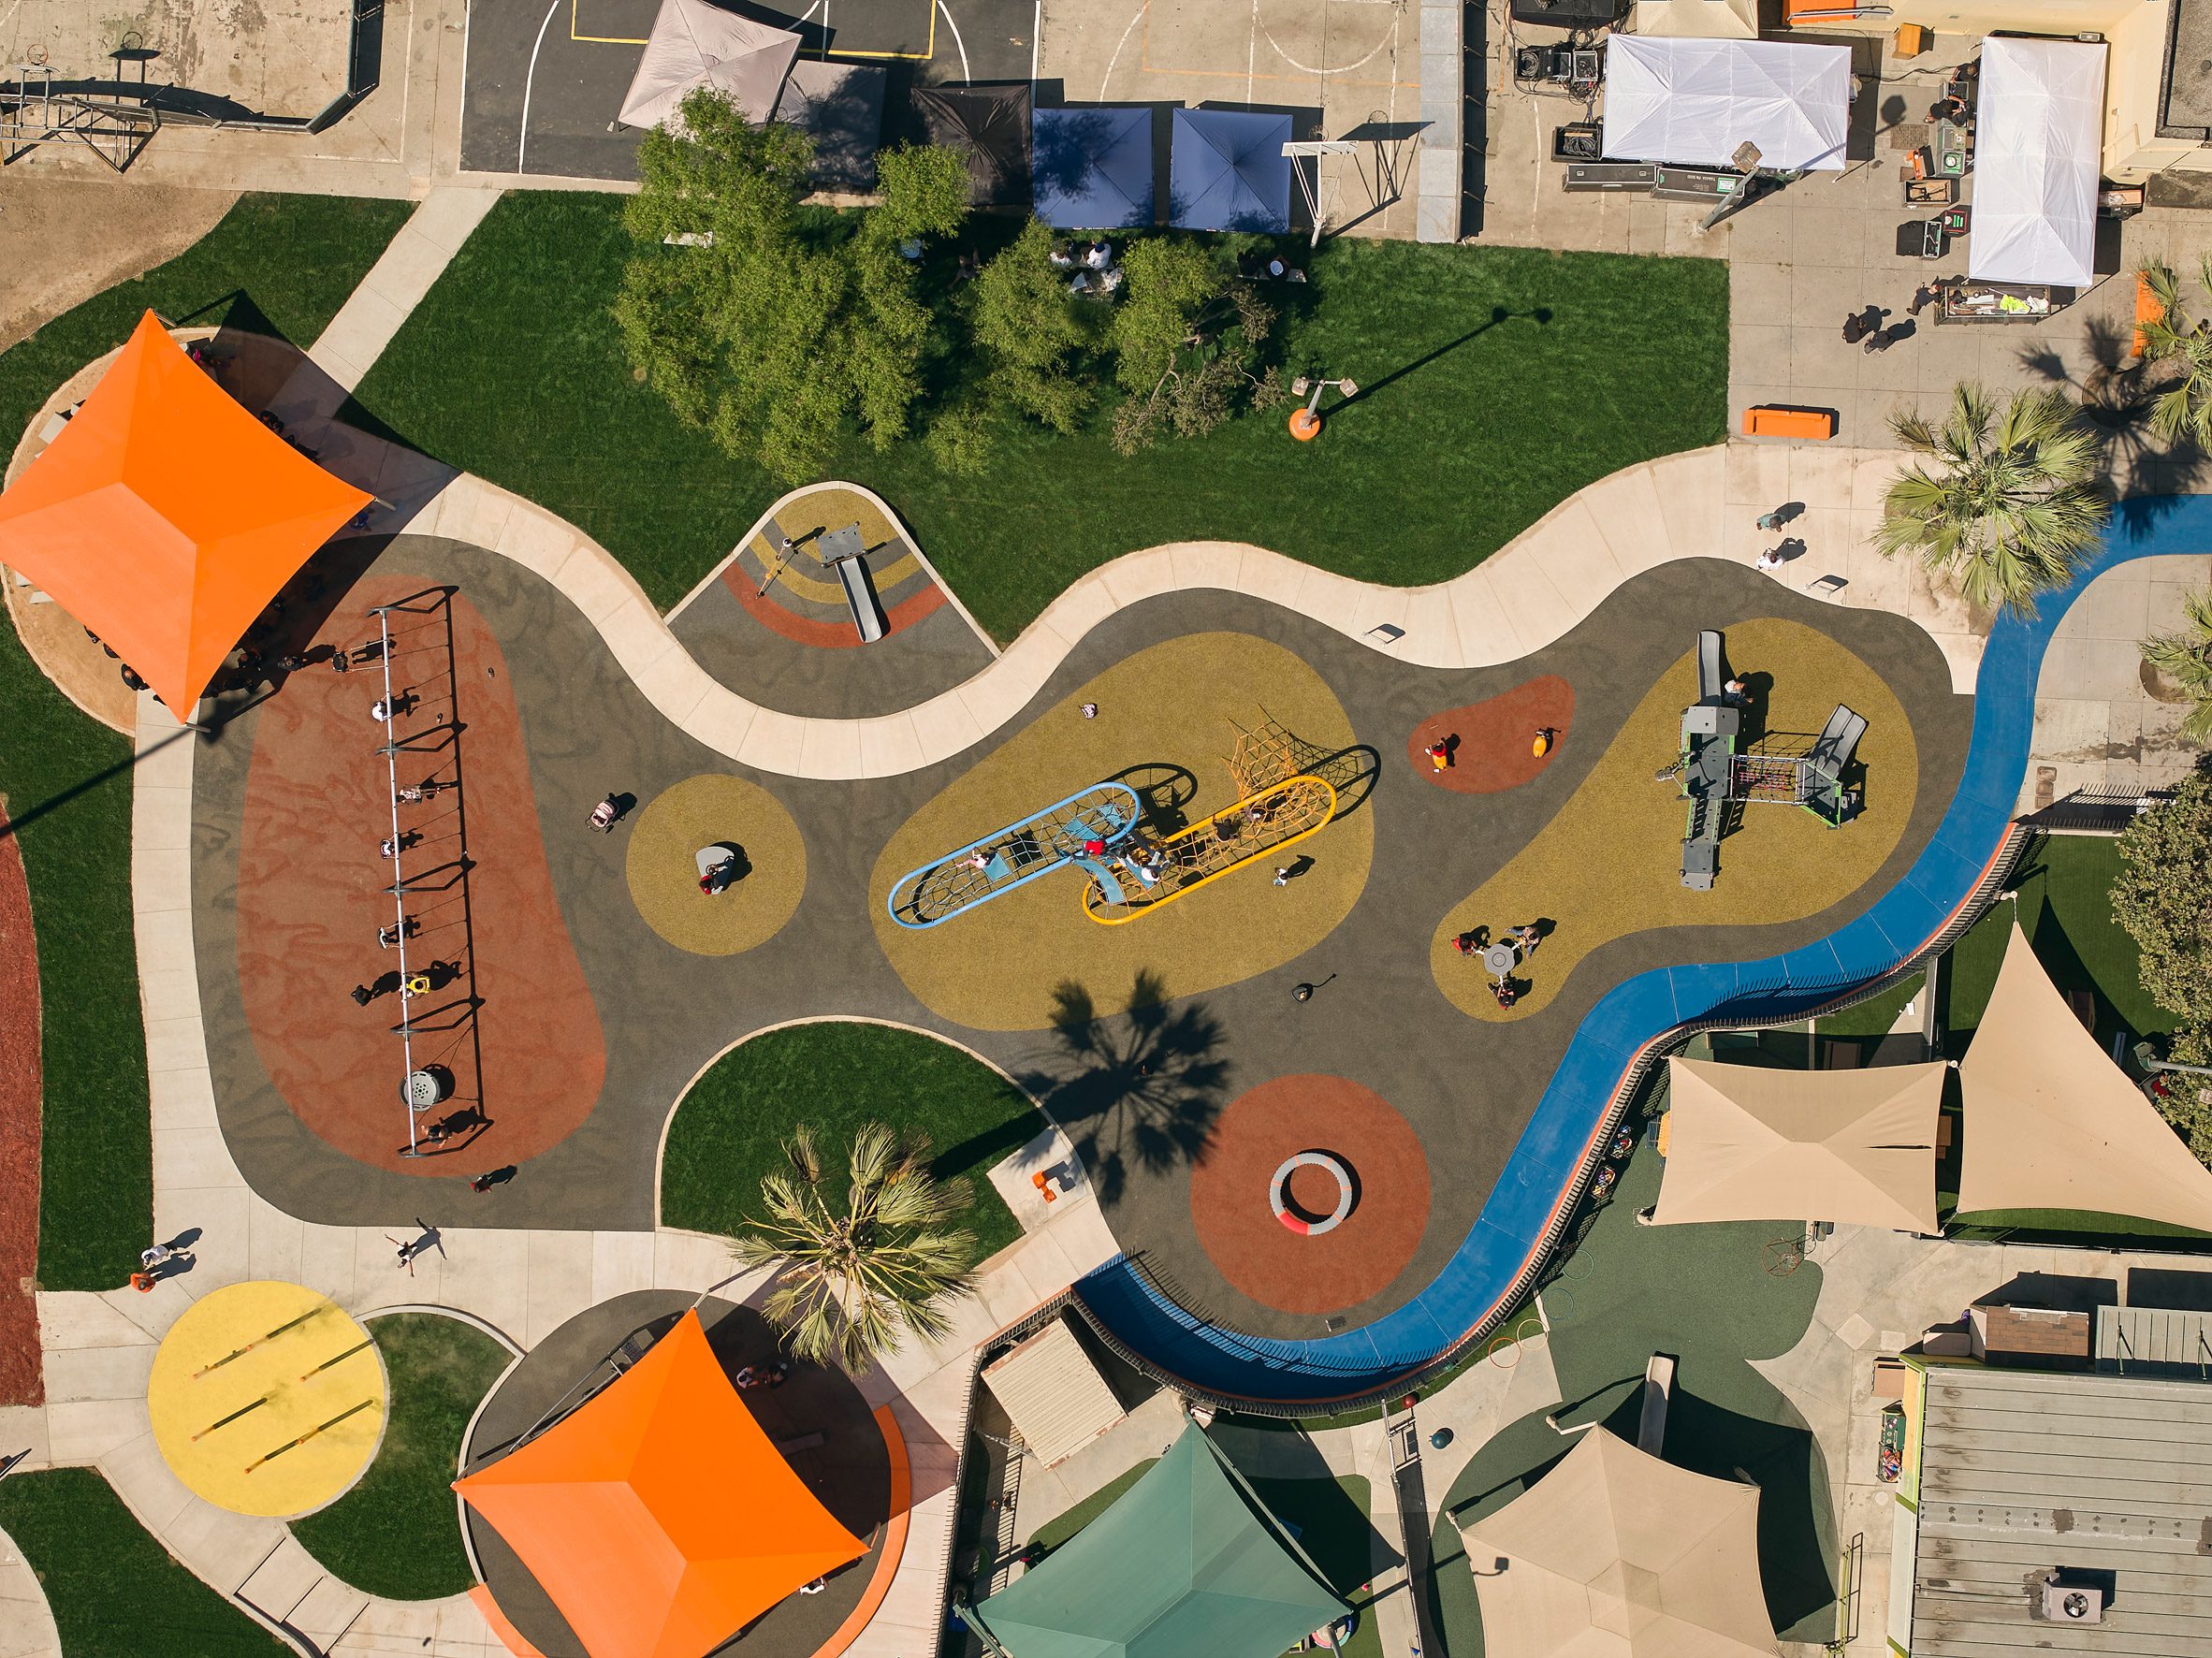 Miulti-colored playground seen from above